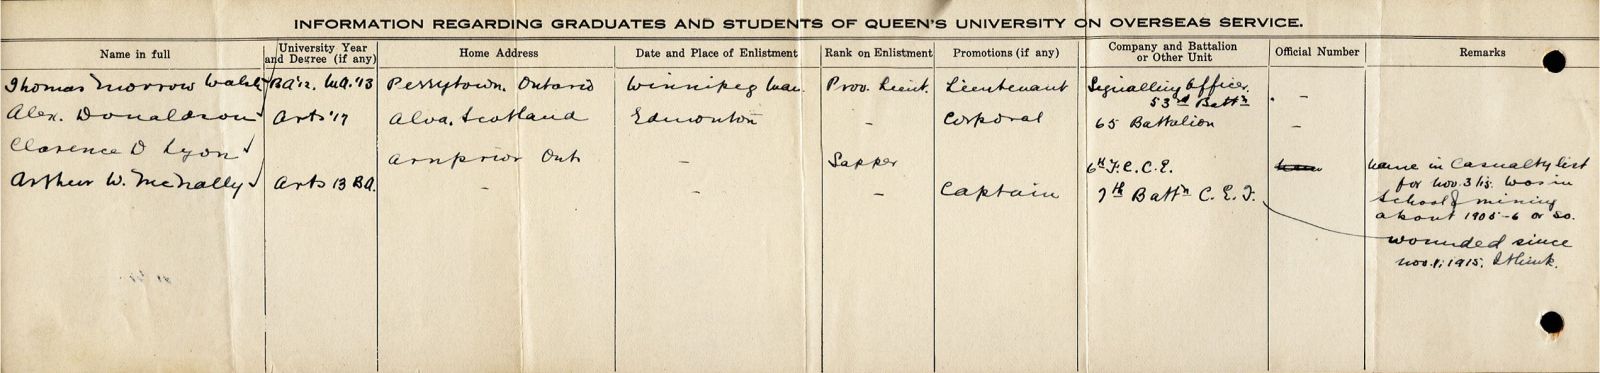 University Overseas Service Record of Walsh